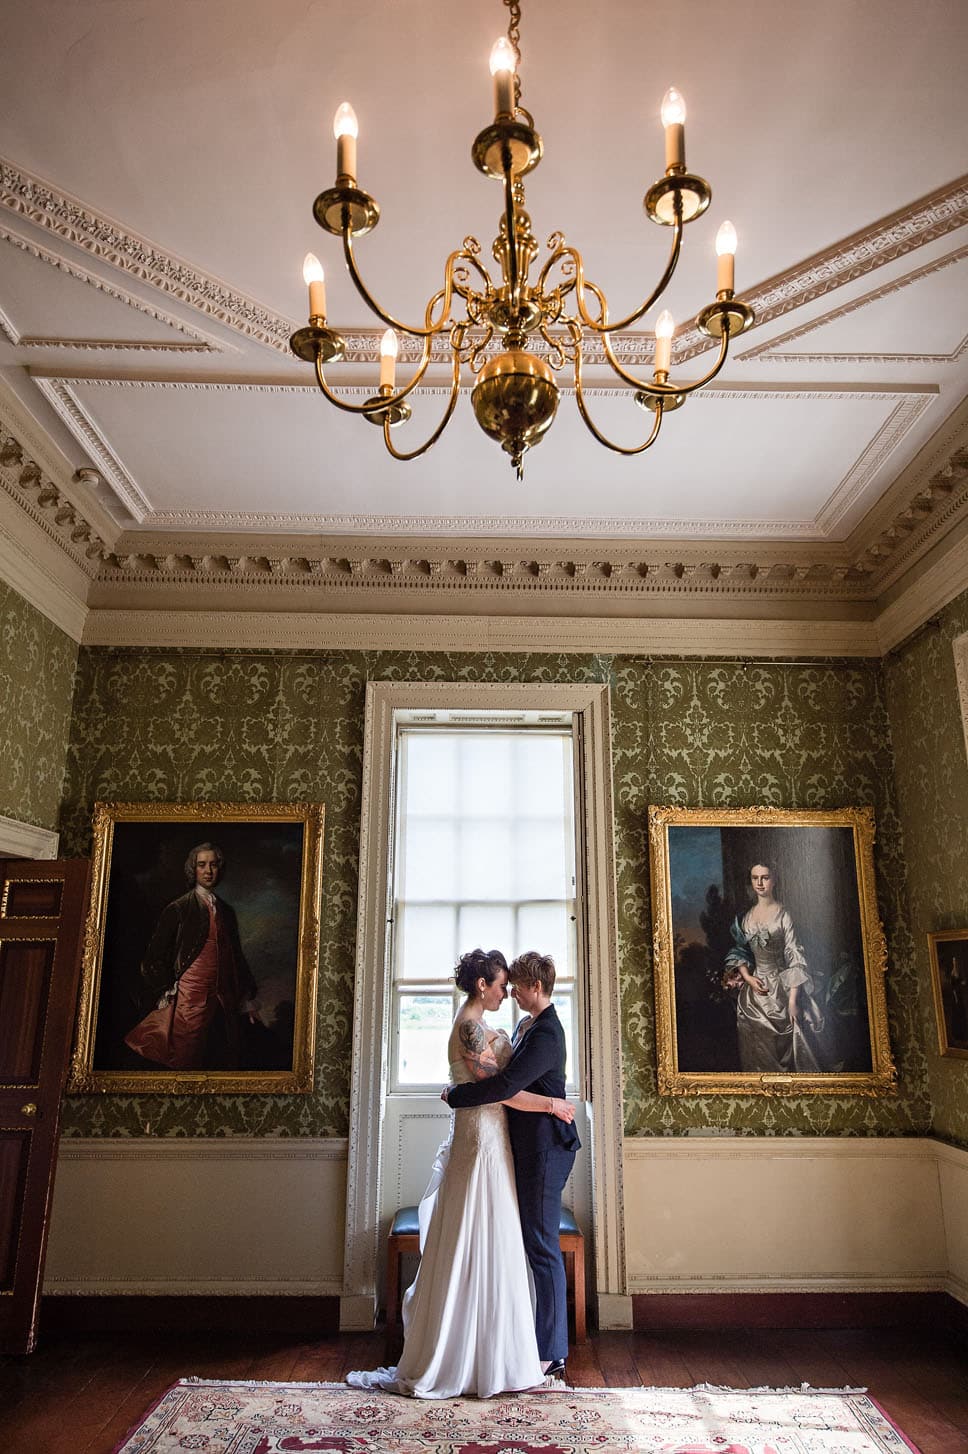 Female LGBT Couple in Stately Home Wedding Portrait Holding Each Other 